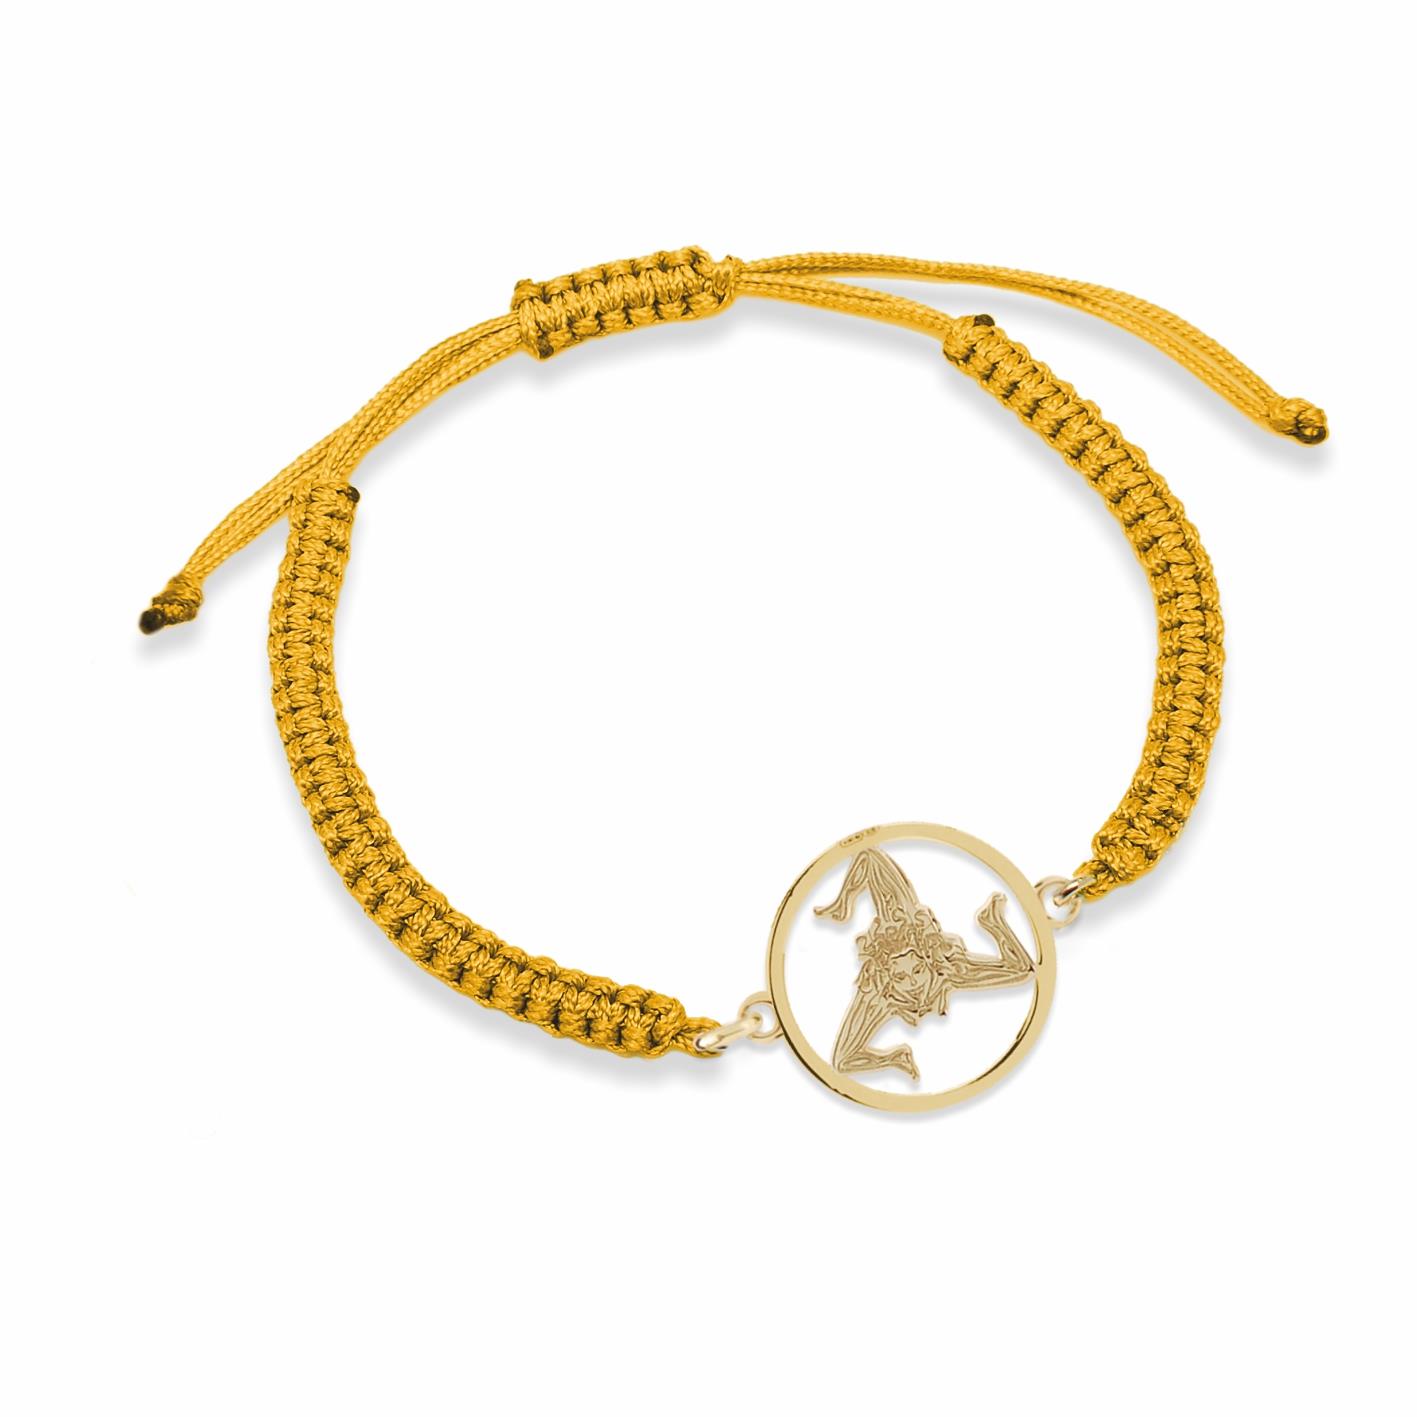 Mustard-colored nylon bracelet with the Trinacria symbol enclosed in the golden silver circle - MY SICILY